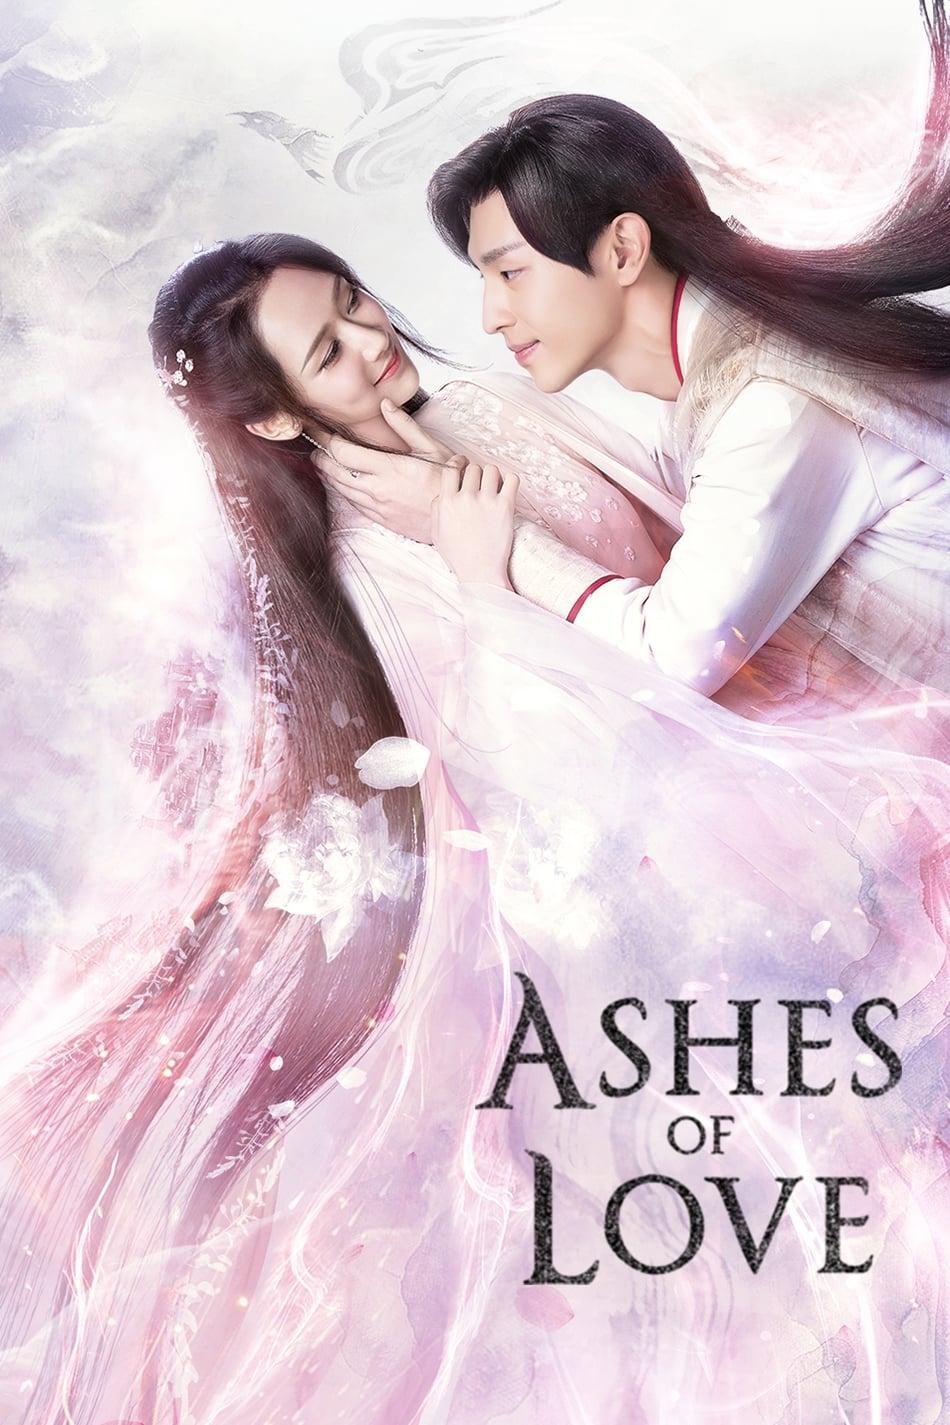 Ashes of Love poster